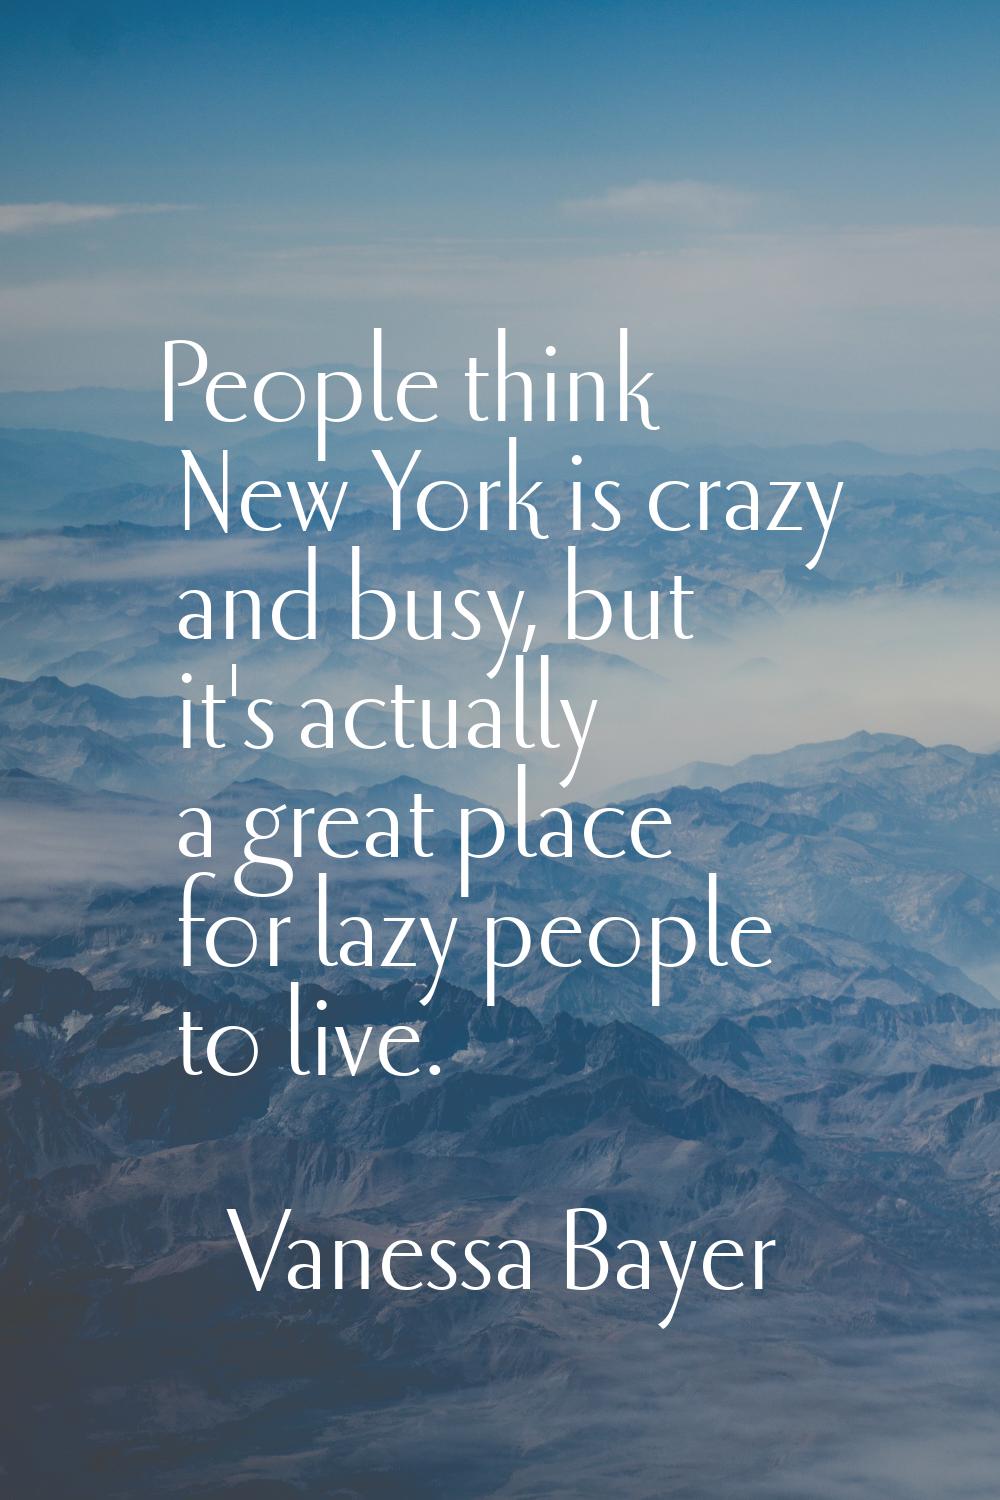 People think New York is crazy and busy, but it's actually a great place for lazy people to live.